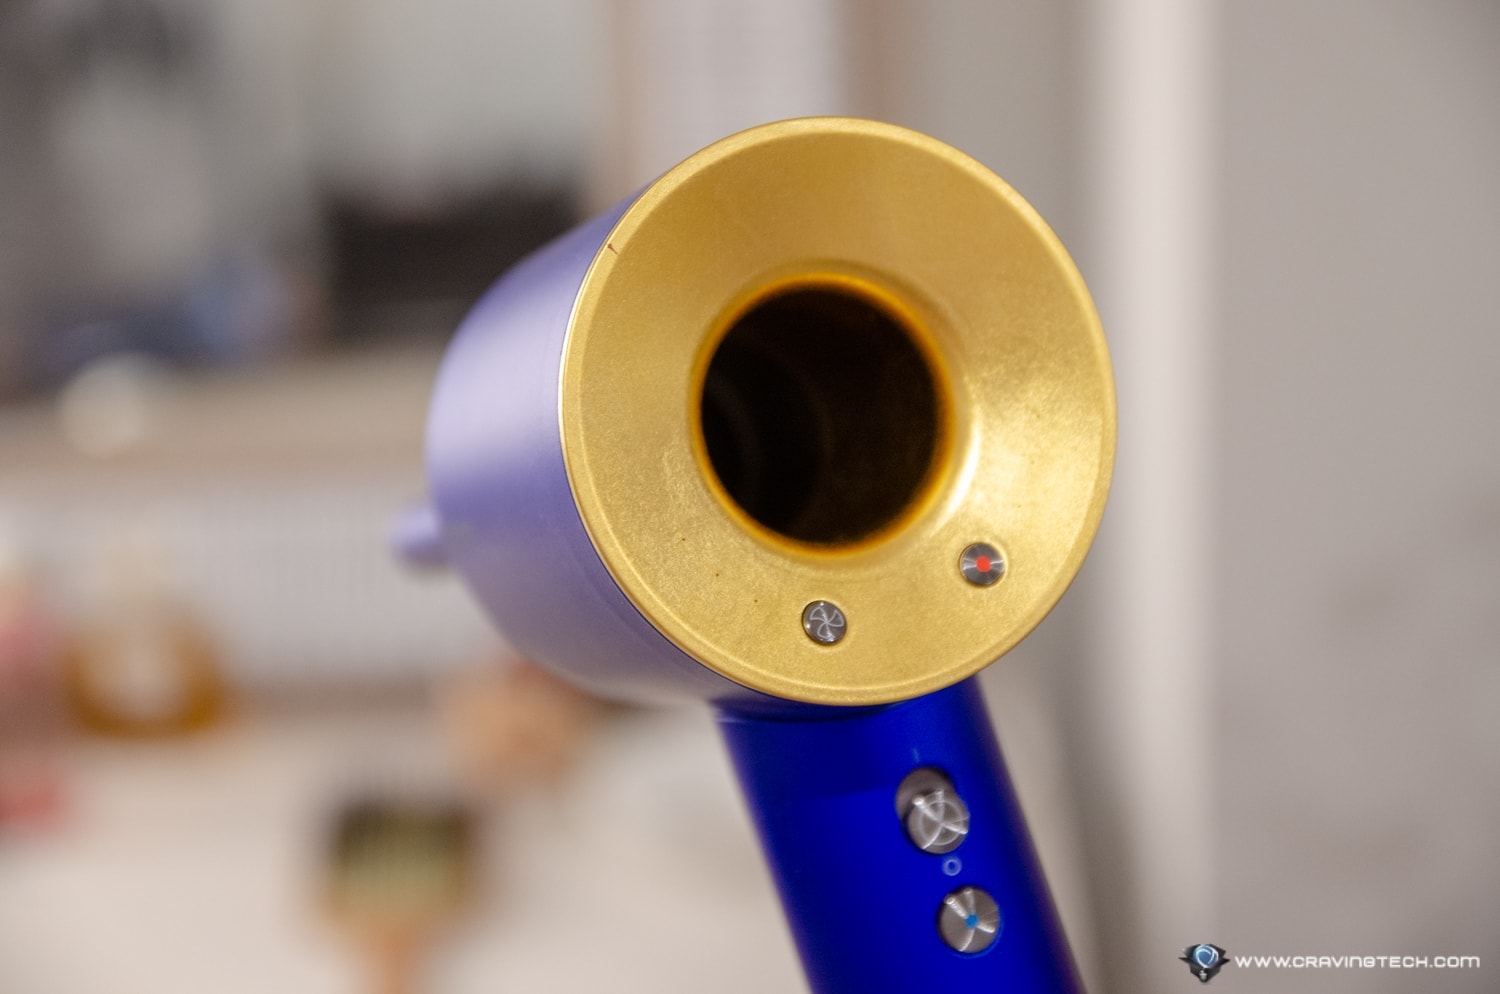 Luxury redefined. Dyson Supersonic Limited Edition comes in  karat gold !